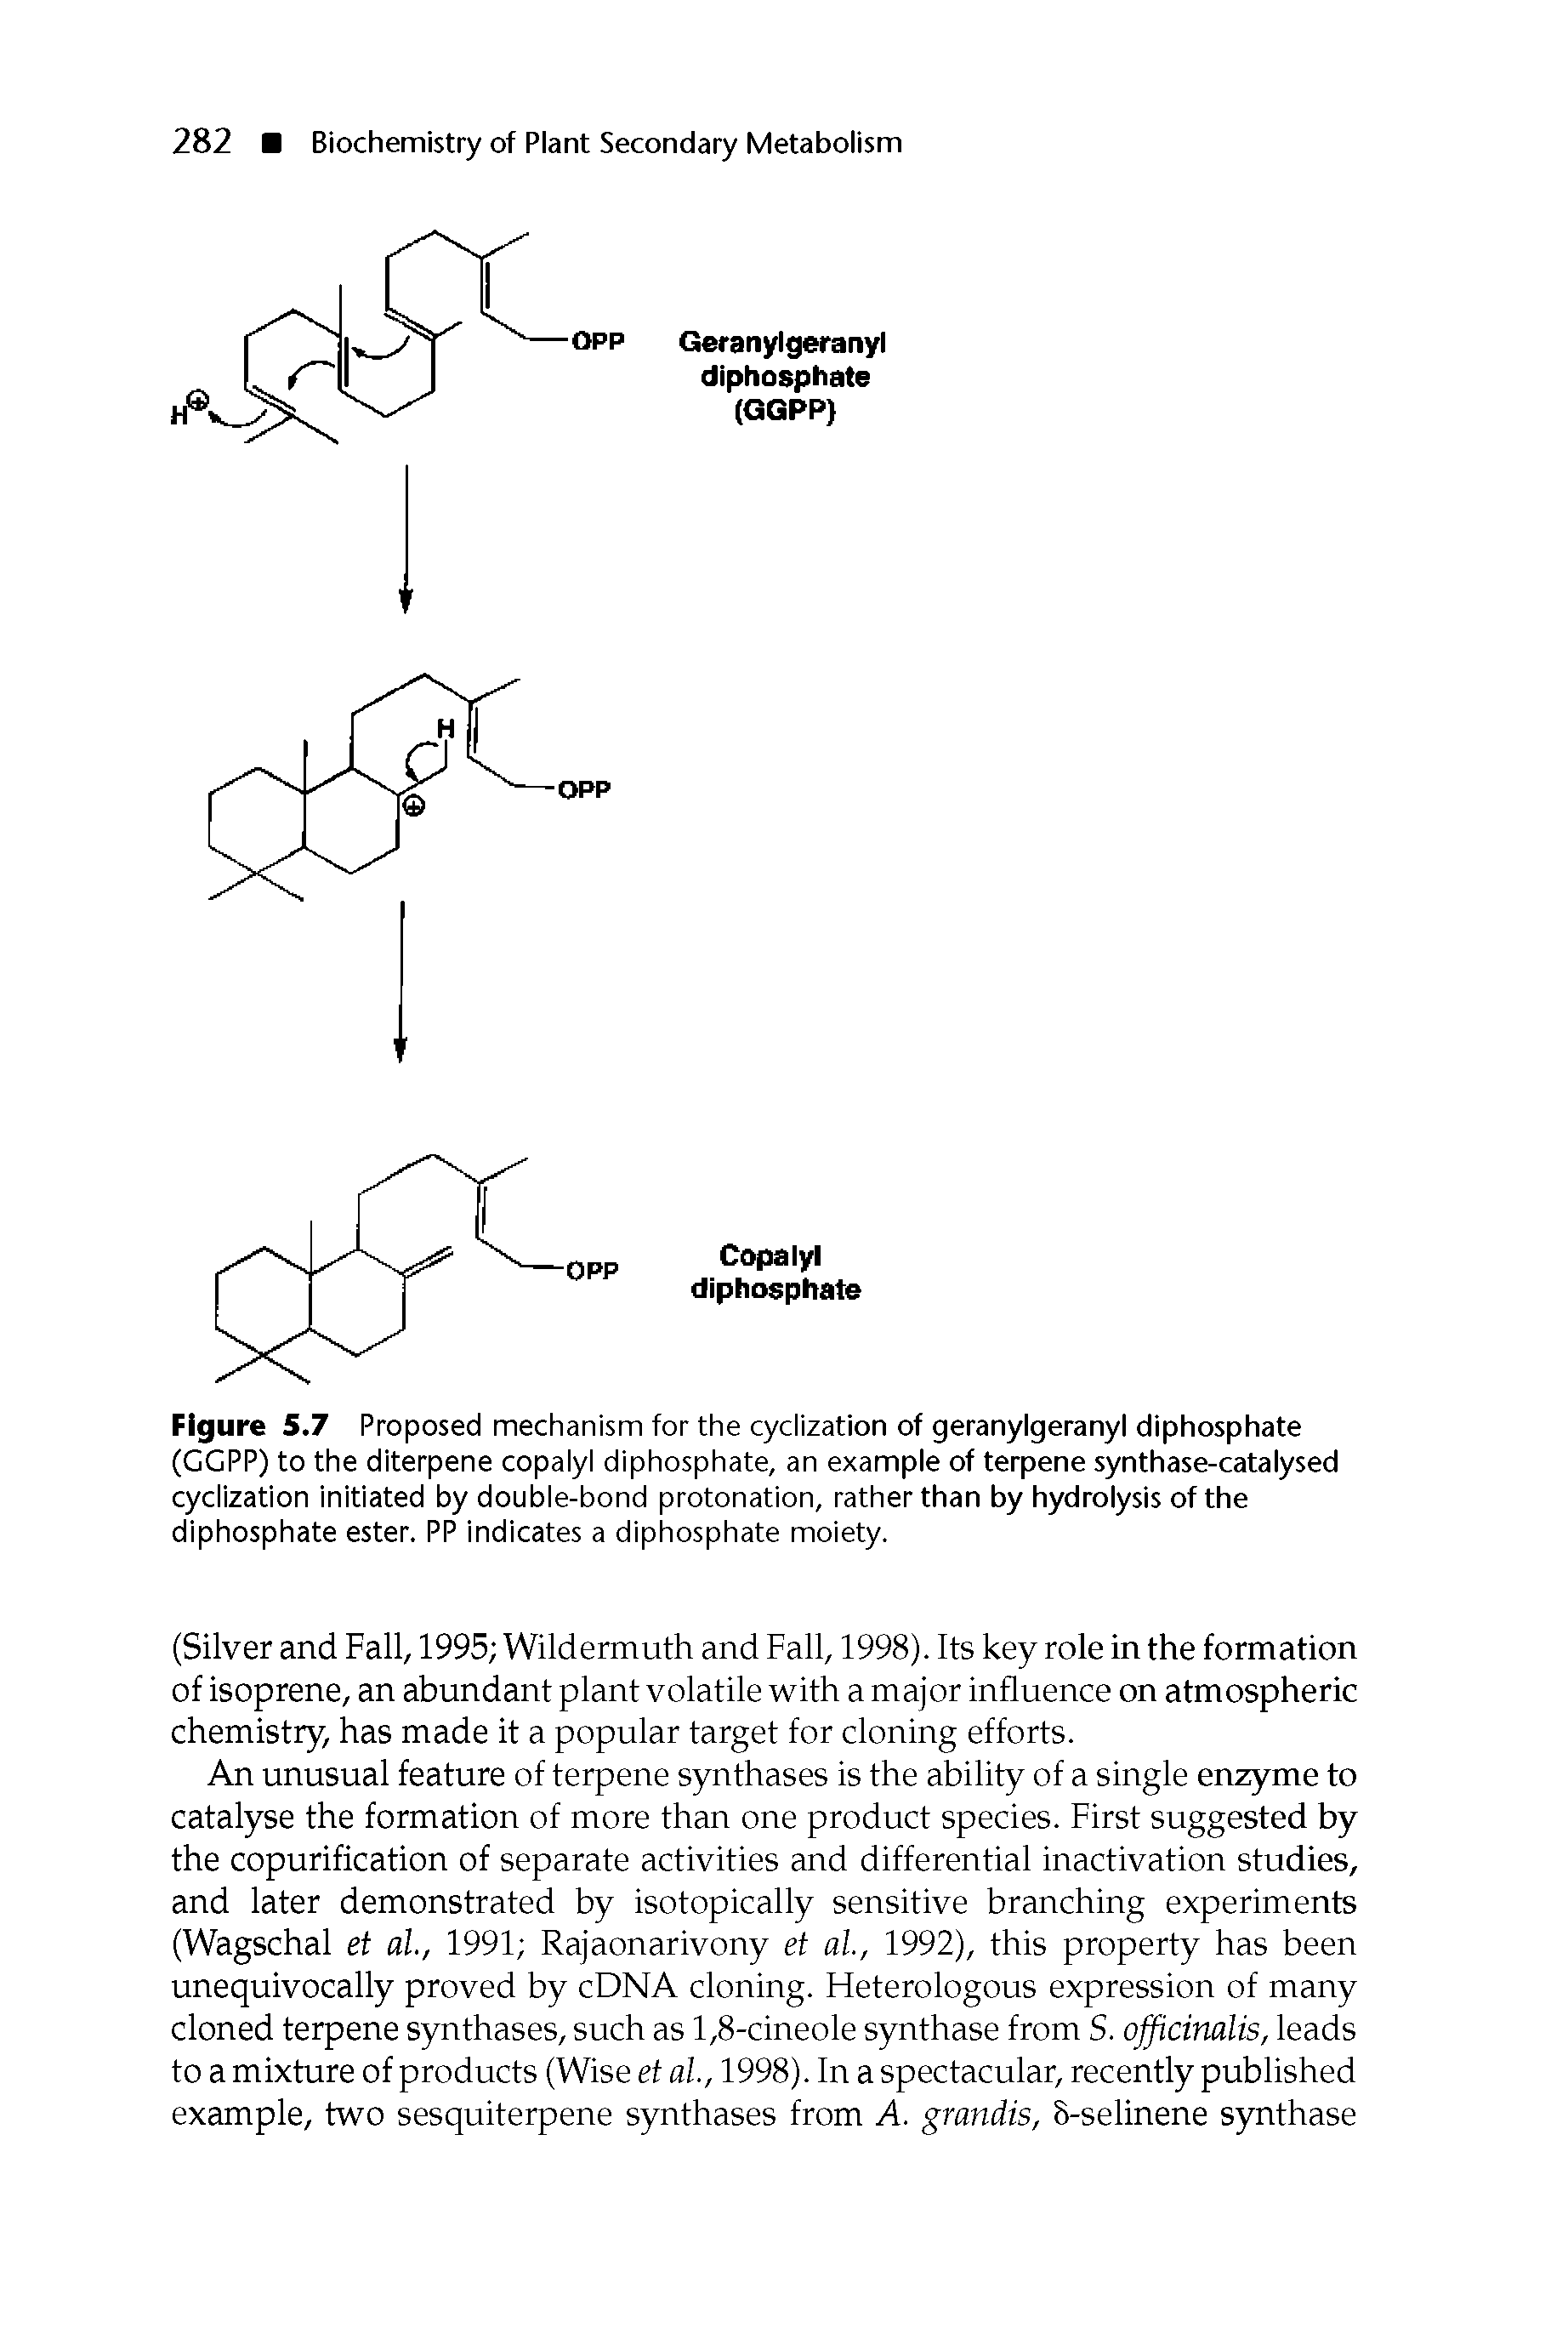 Figure 5.7 Proposed mechanism for the cyclization of geranylgeranyl diphosphate (GGPP) to the diterpene copalyl diphosphate, an example of terpene synthase-catalysed cyclization initiated by double-bond protonation, rather than by hydrolysis of the diphosphate ester. PP indicates a diphosphate moiety.